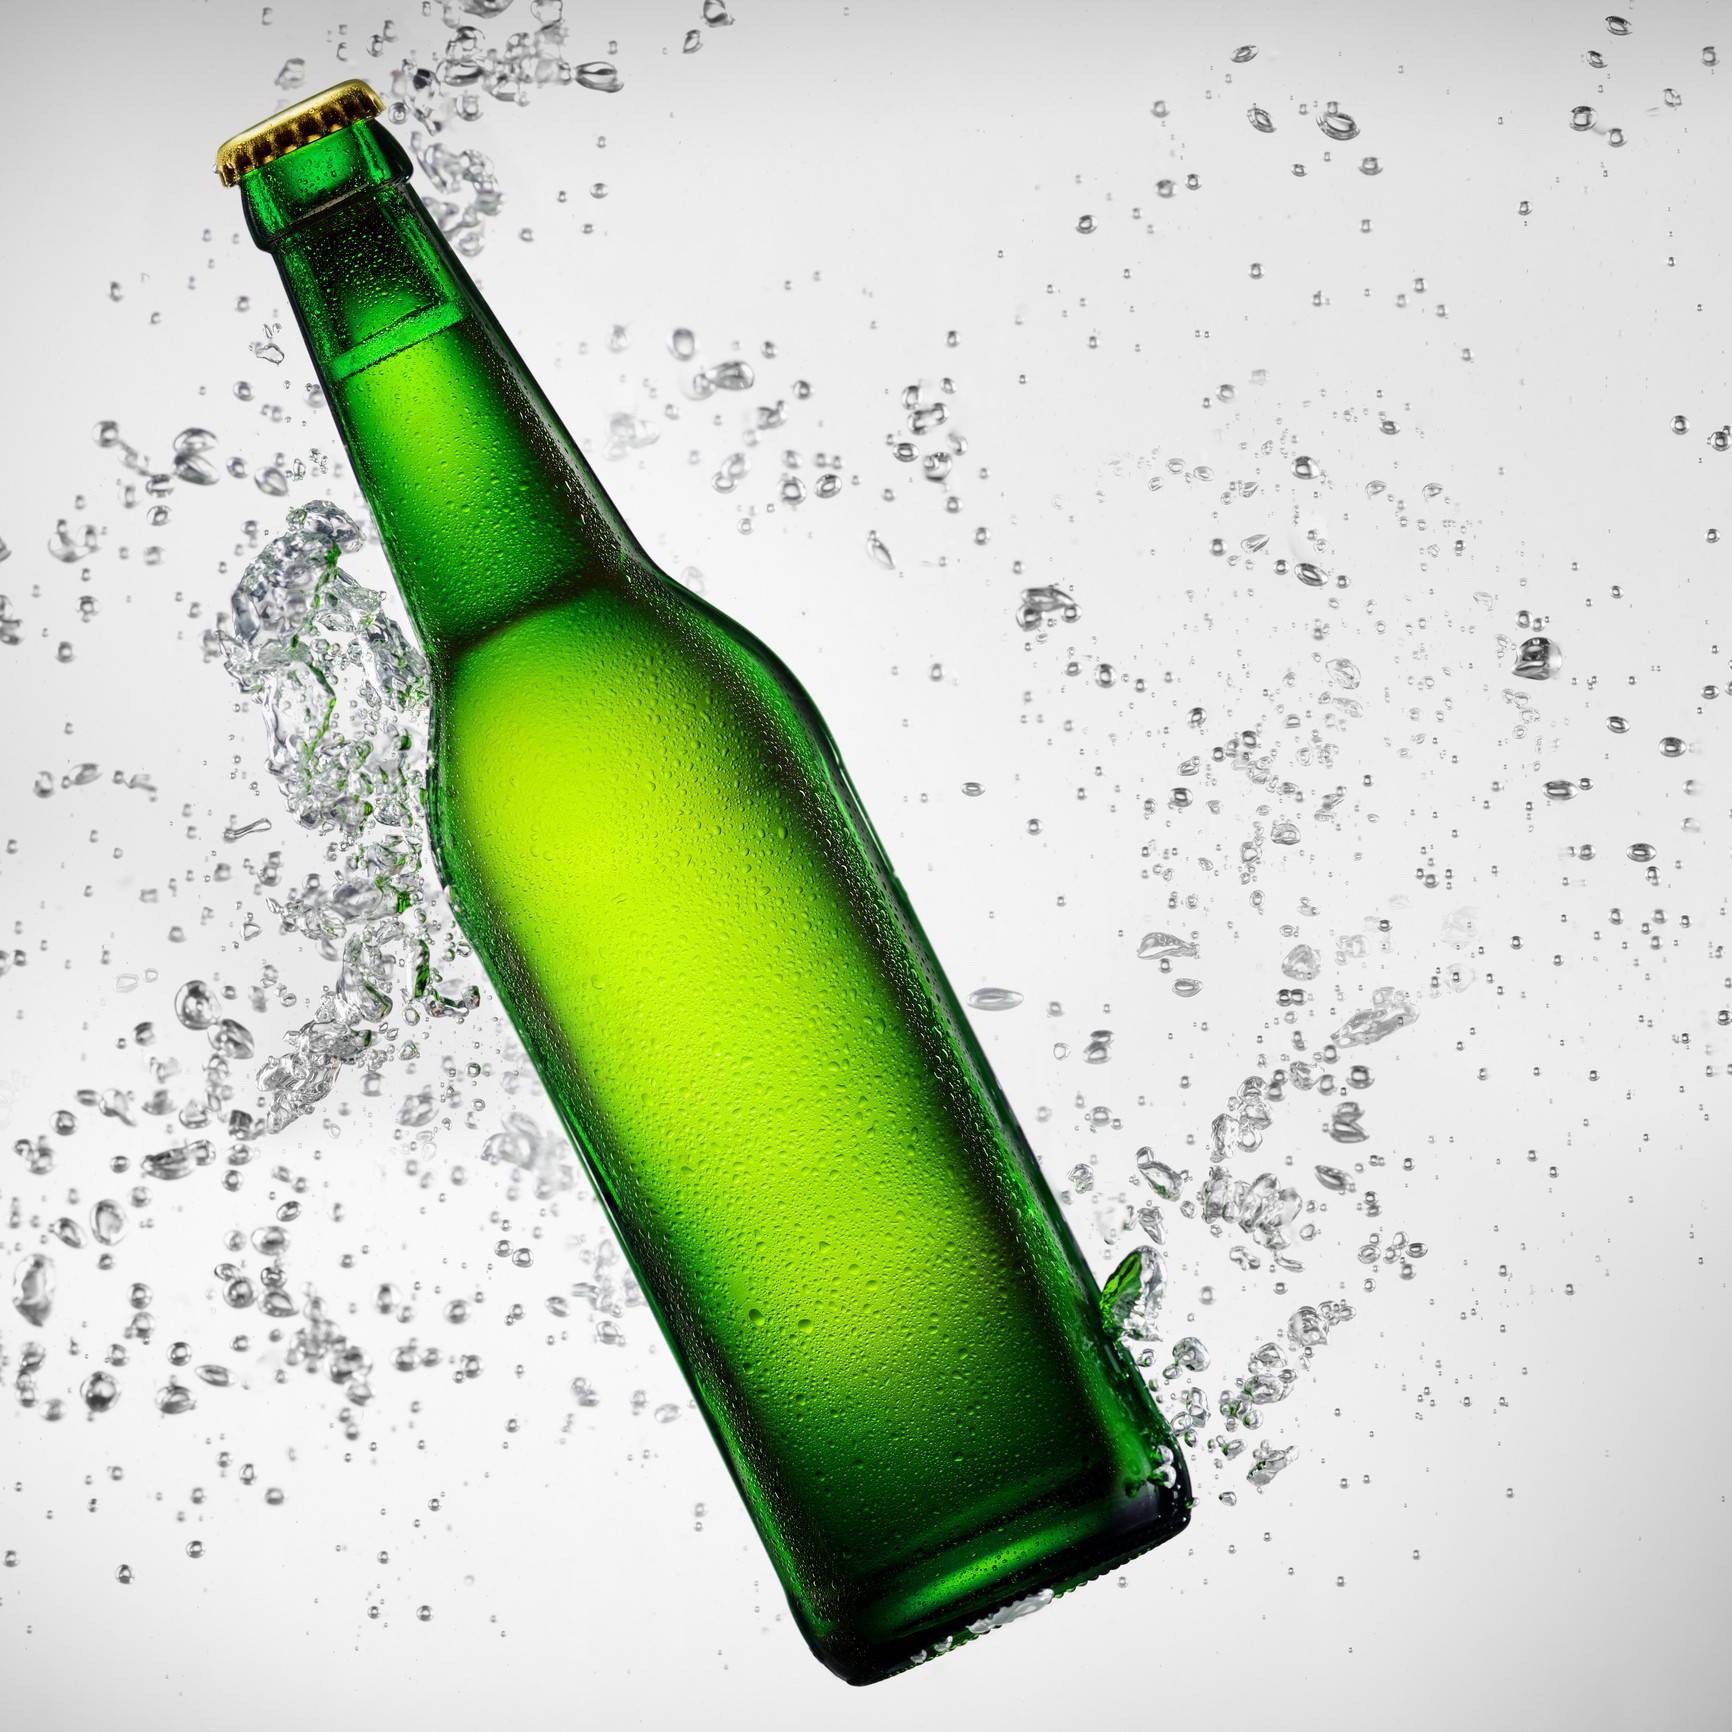 Green bottle of beer falling into water